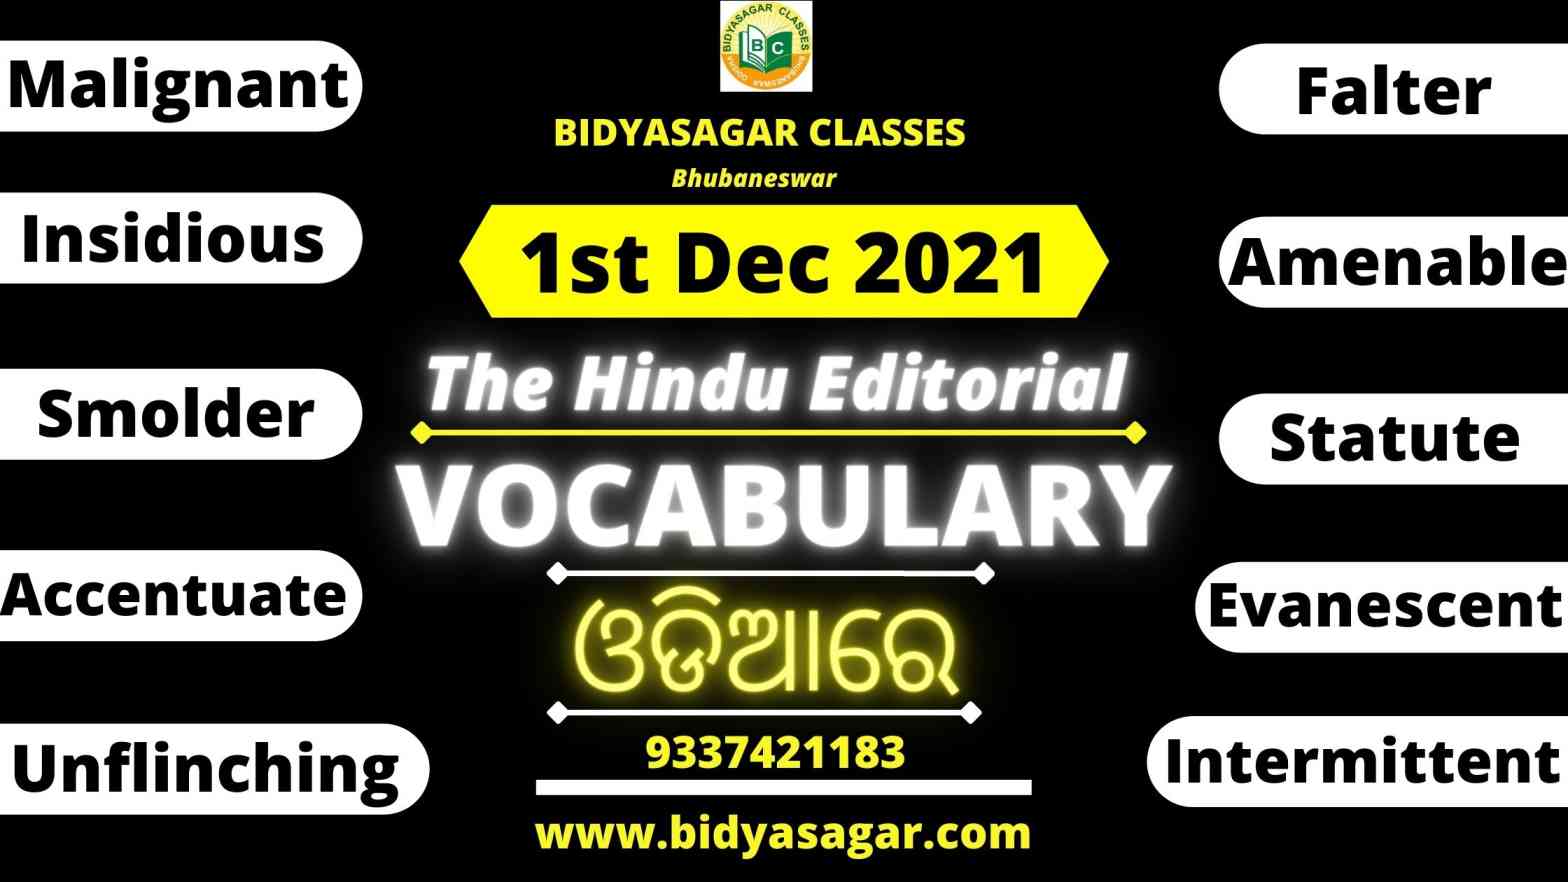 The Hindu Editorial Vocabulary of 1st December 2021